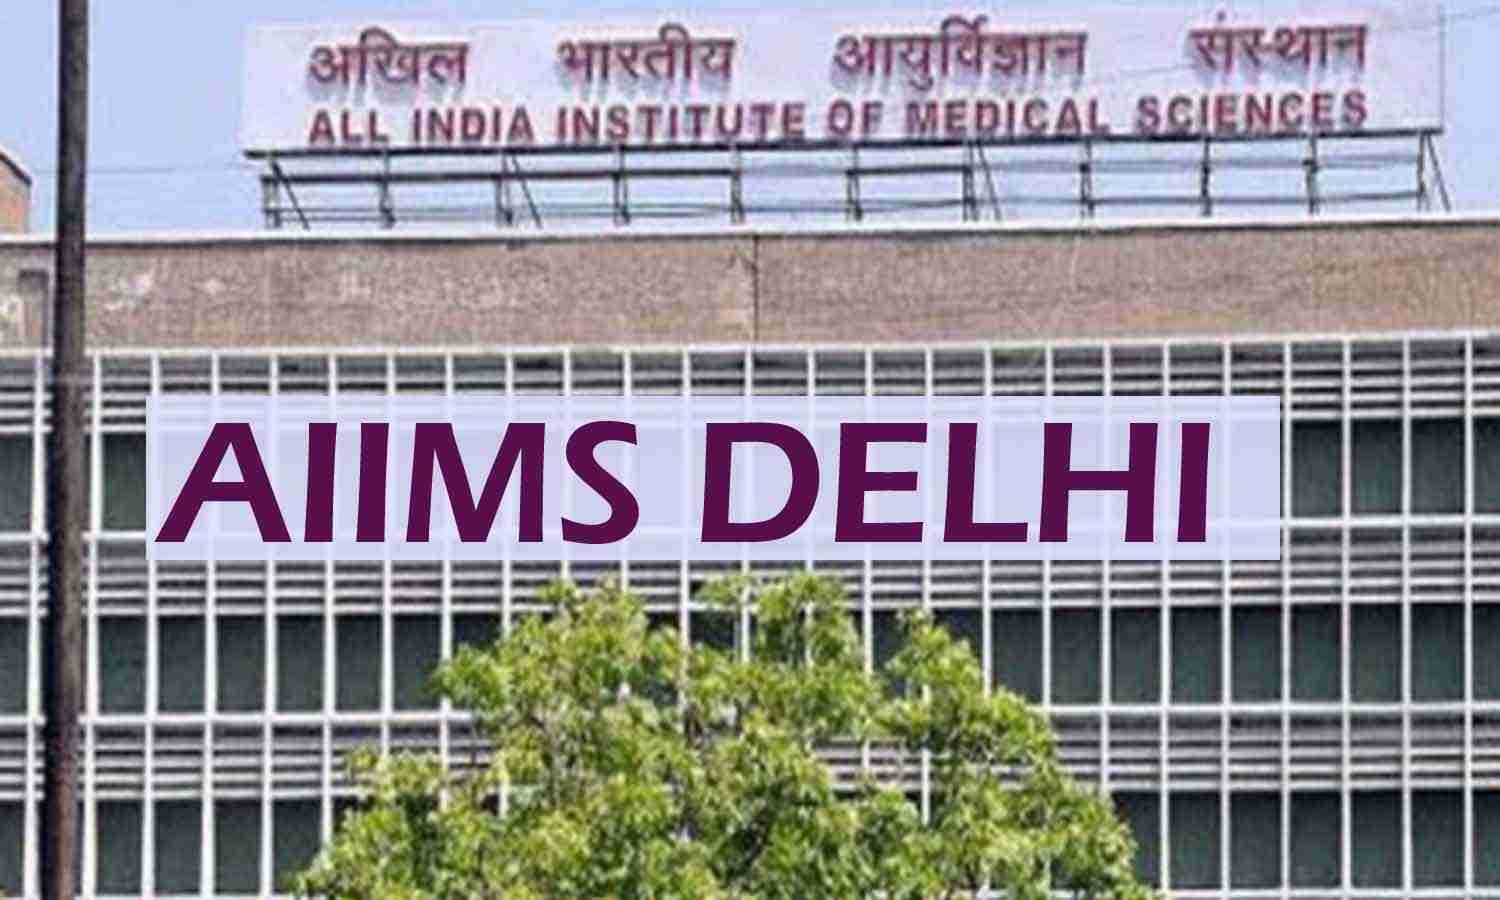 Risk of Covid spread from dead bodies unlikely, says AIIMS